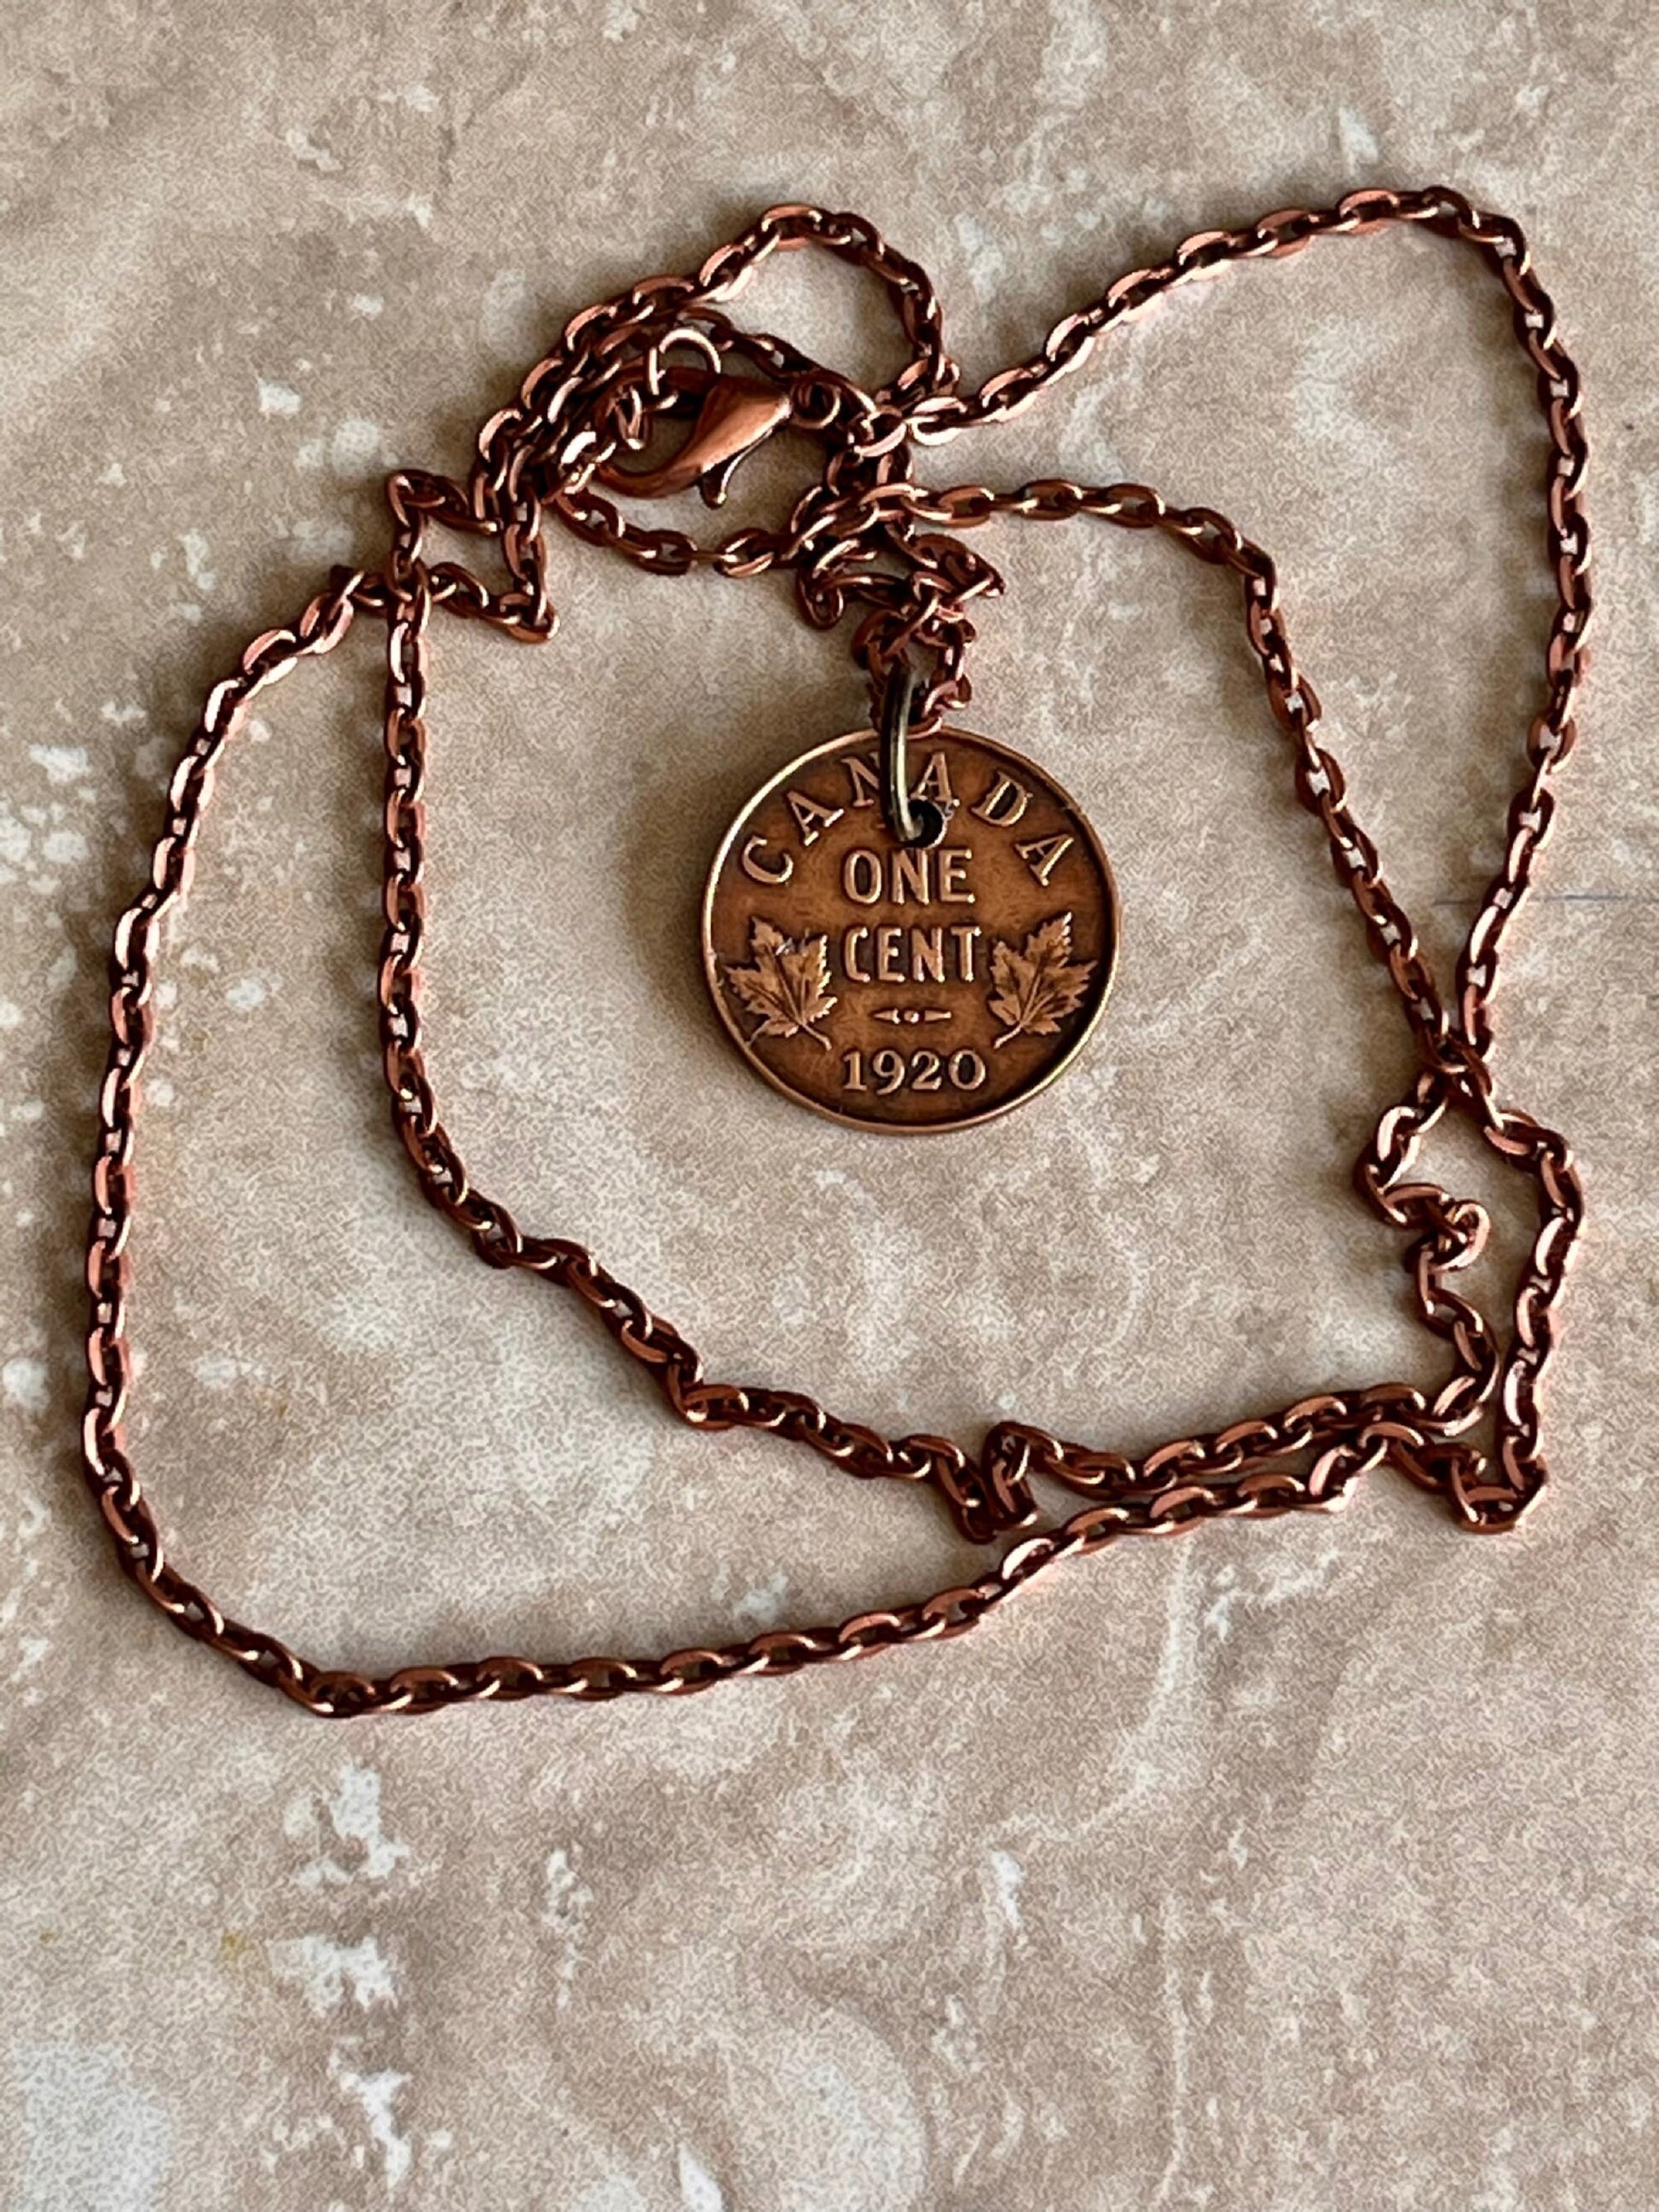 Canadian Penny Coin Pendant Coin One Cent Necklace Handmade Jewelry Gift For Friend Coin Charm Gift For Him, Her, World Coins Collector